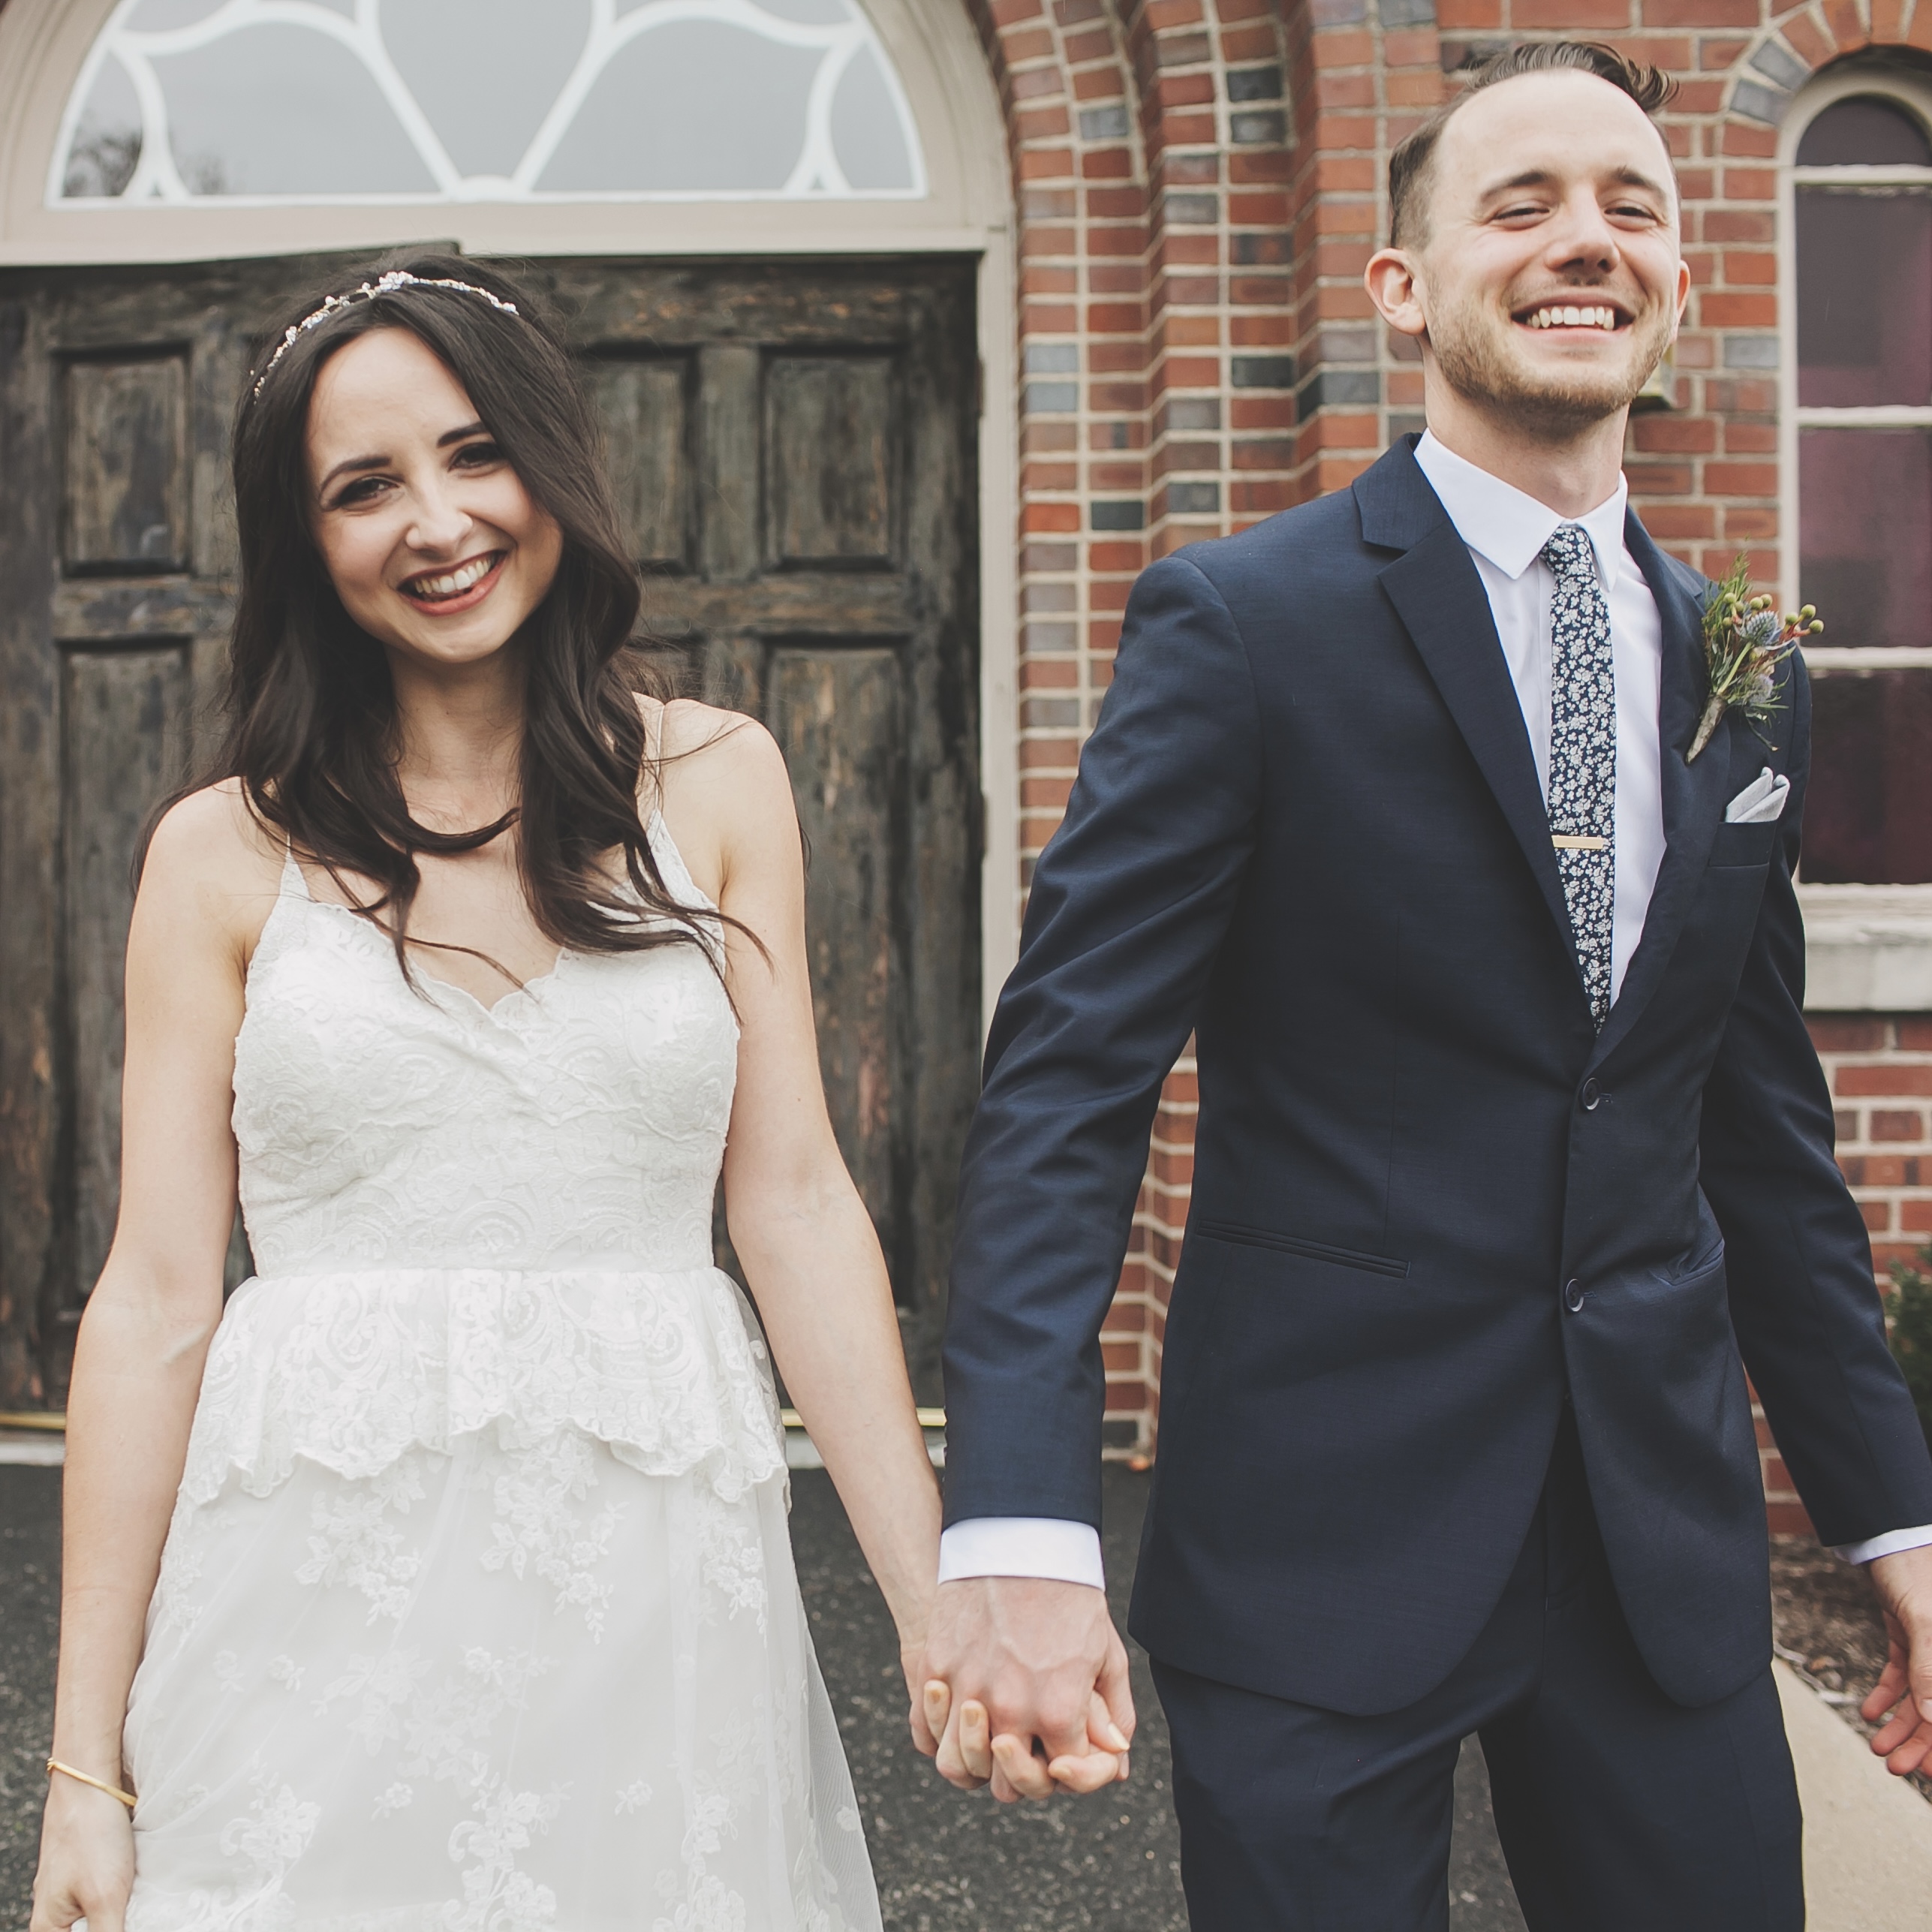 A young couple leave a church after getting married